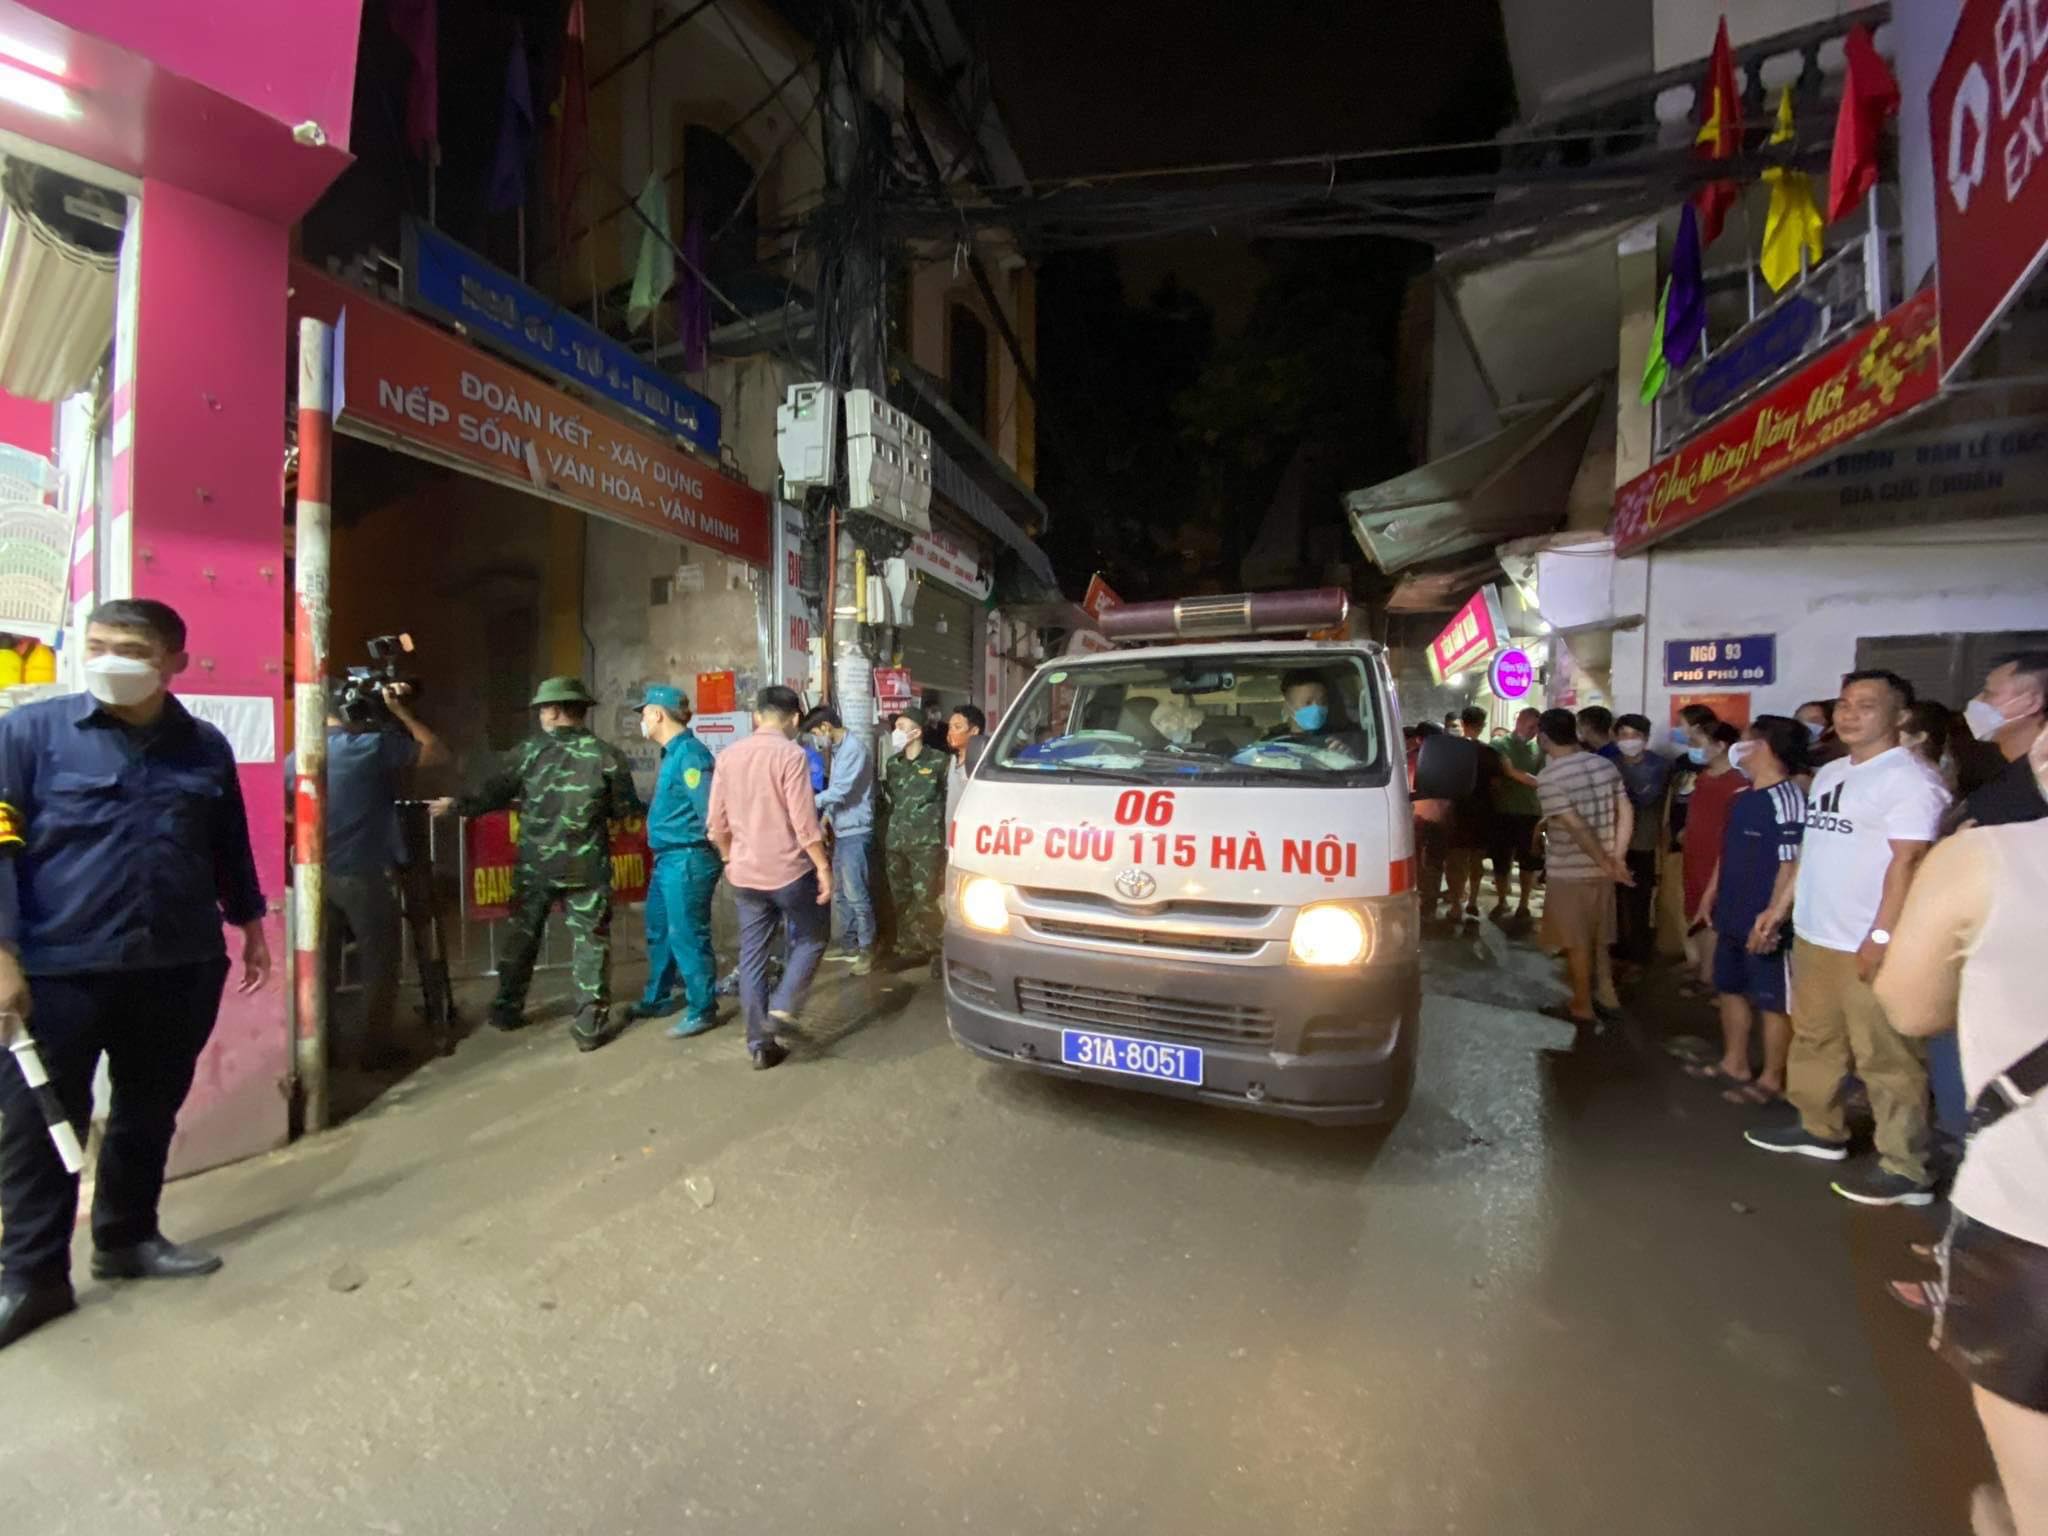 An ambulance arrives at the scene of a fire at a rented house in Nam Tu Liem District, Hanoi, March 31, 2022. Photo: Tuoi Tre